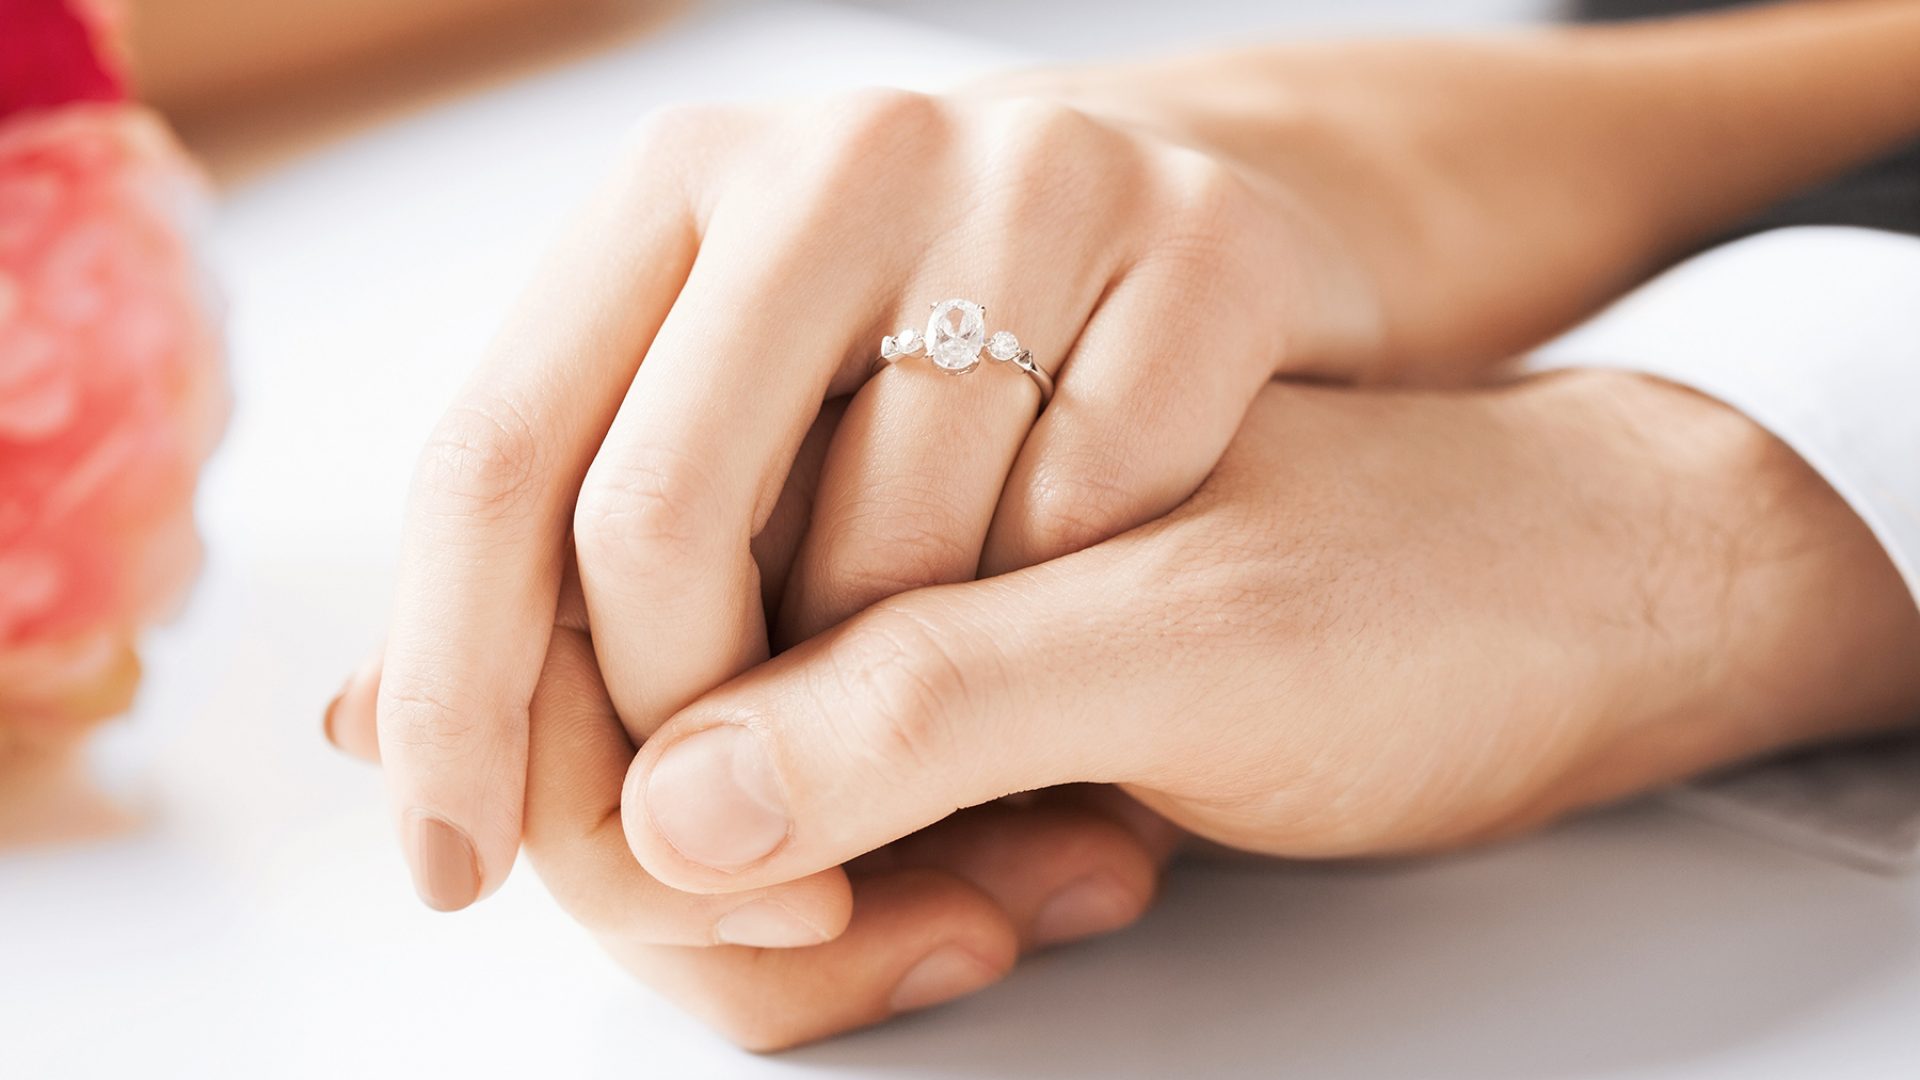 Things To Consider While Purchasing An Engagement Ring